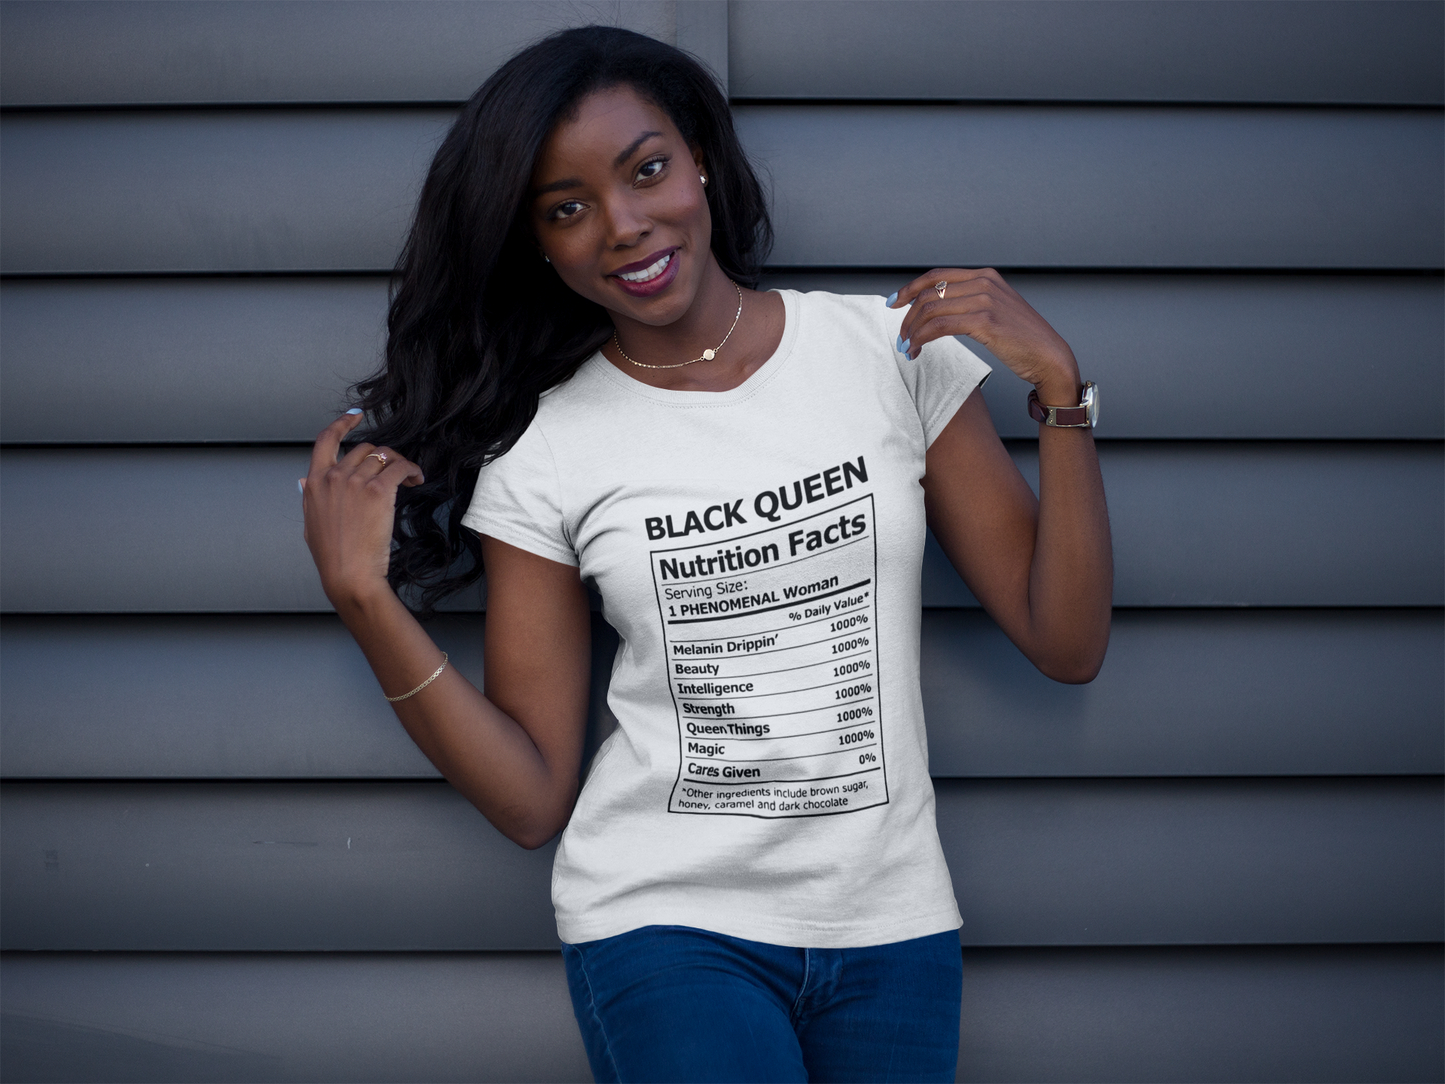 "Black Queen Nutrition Facts" T-Shirt (Available in Stone Gray)